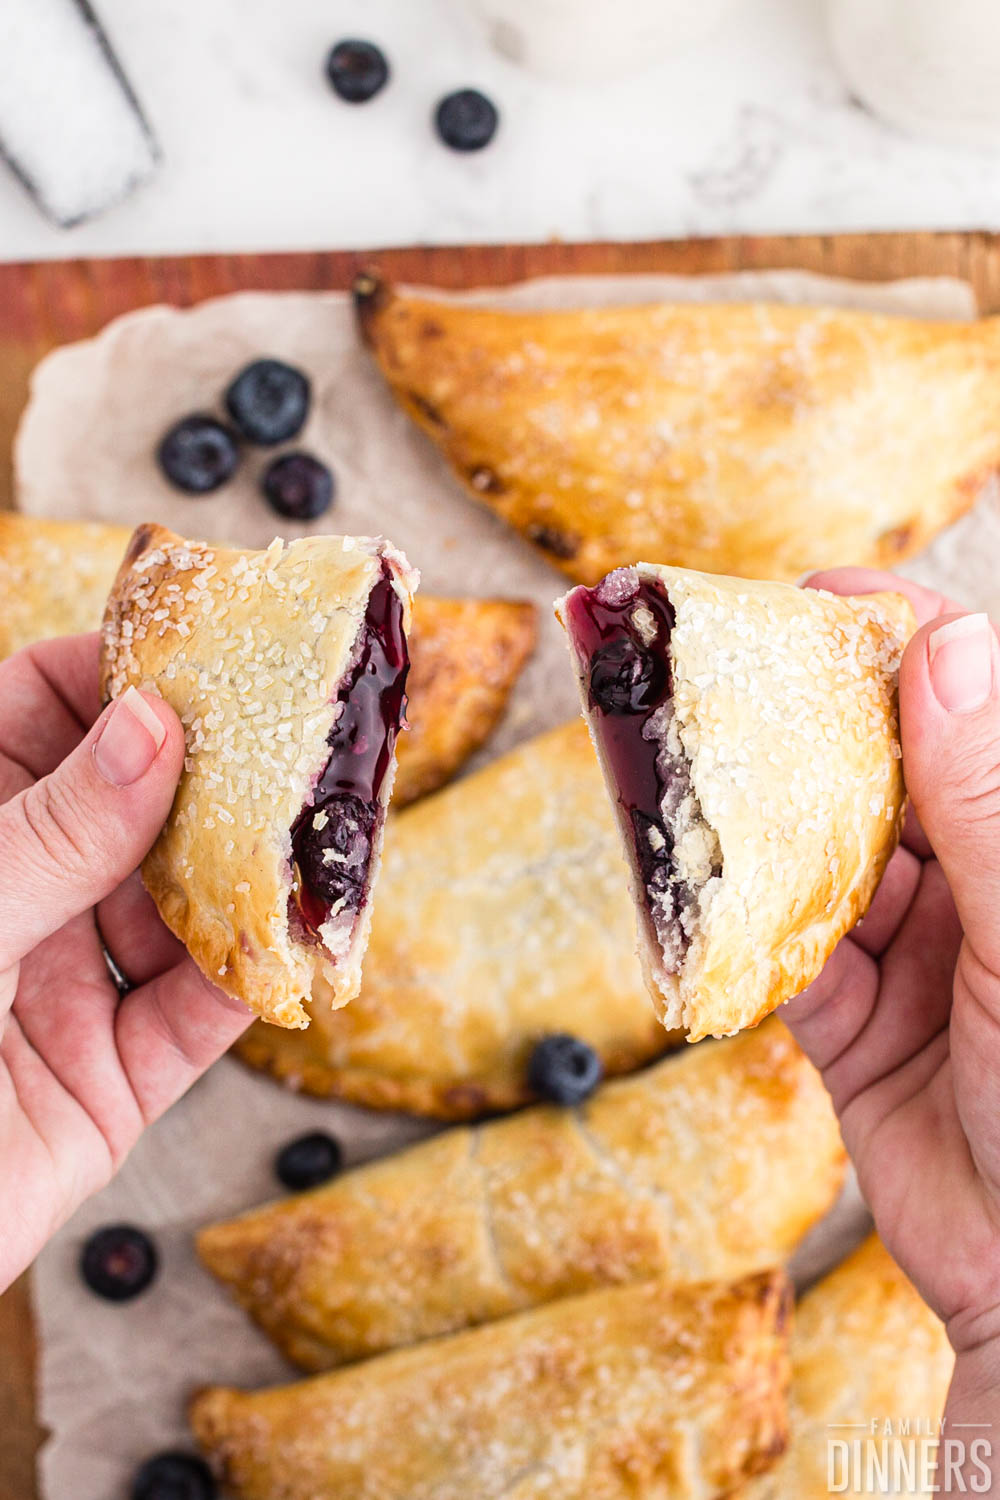 hands holding opened blueberry hand pie